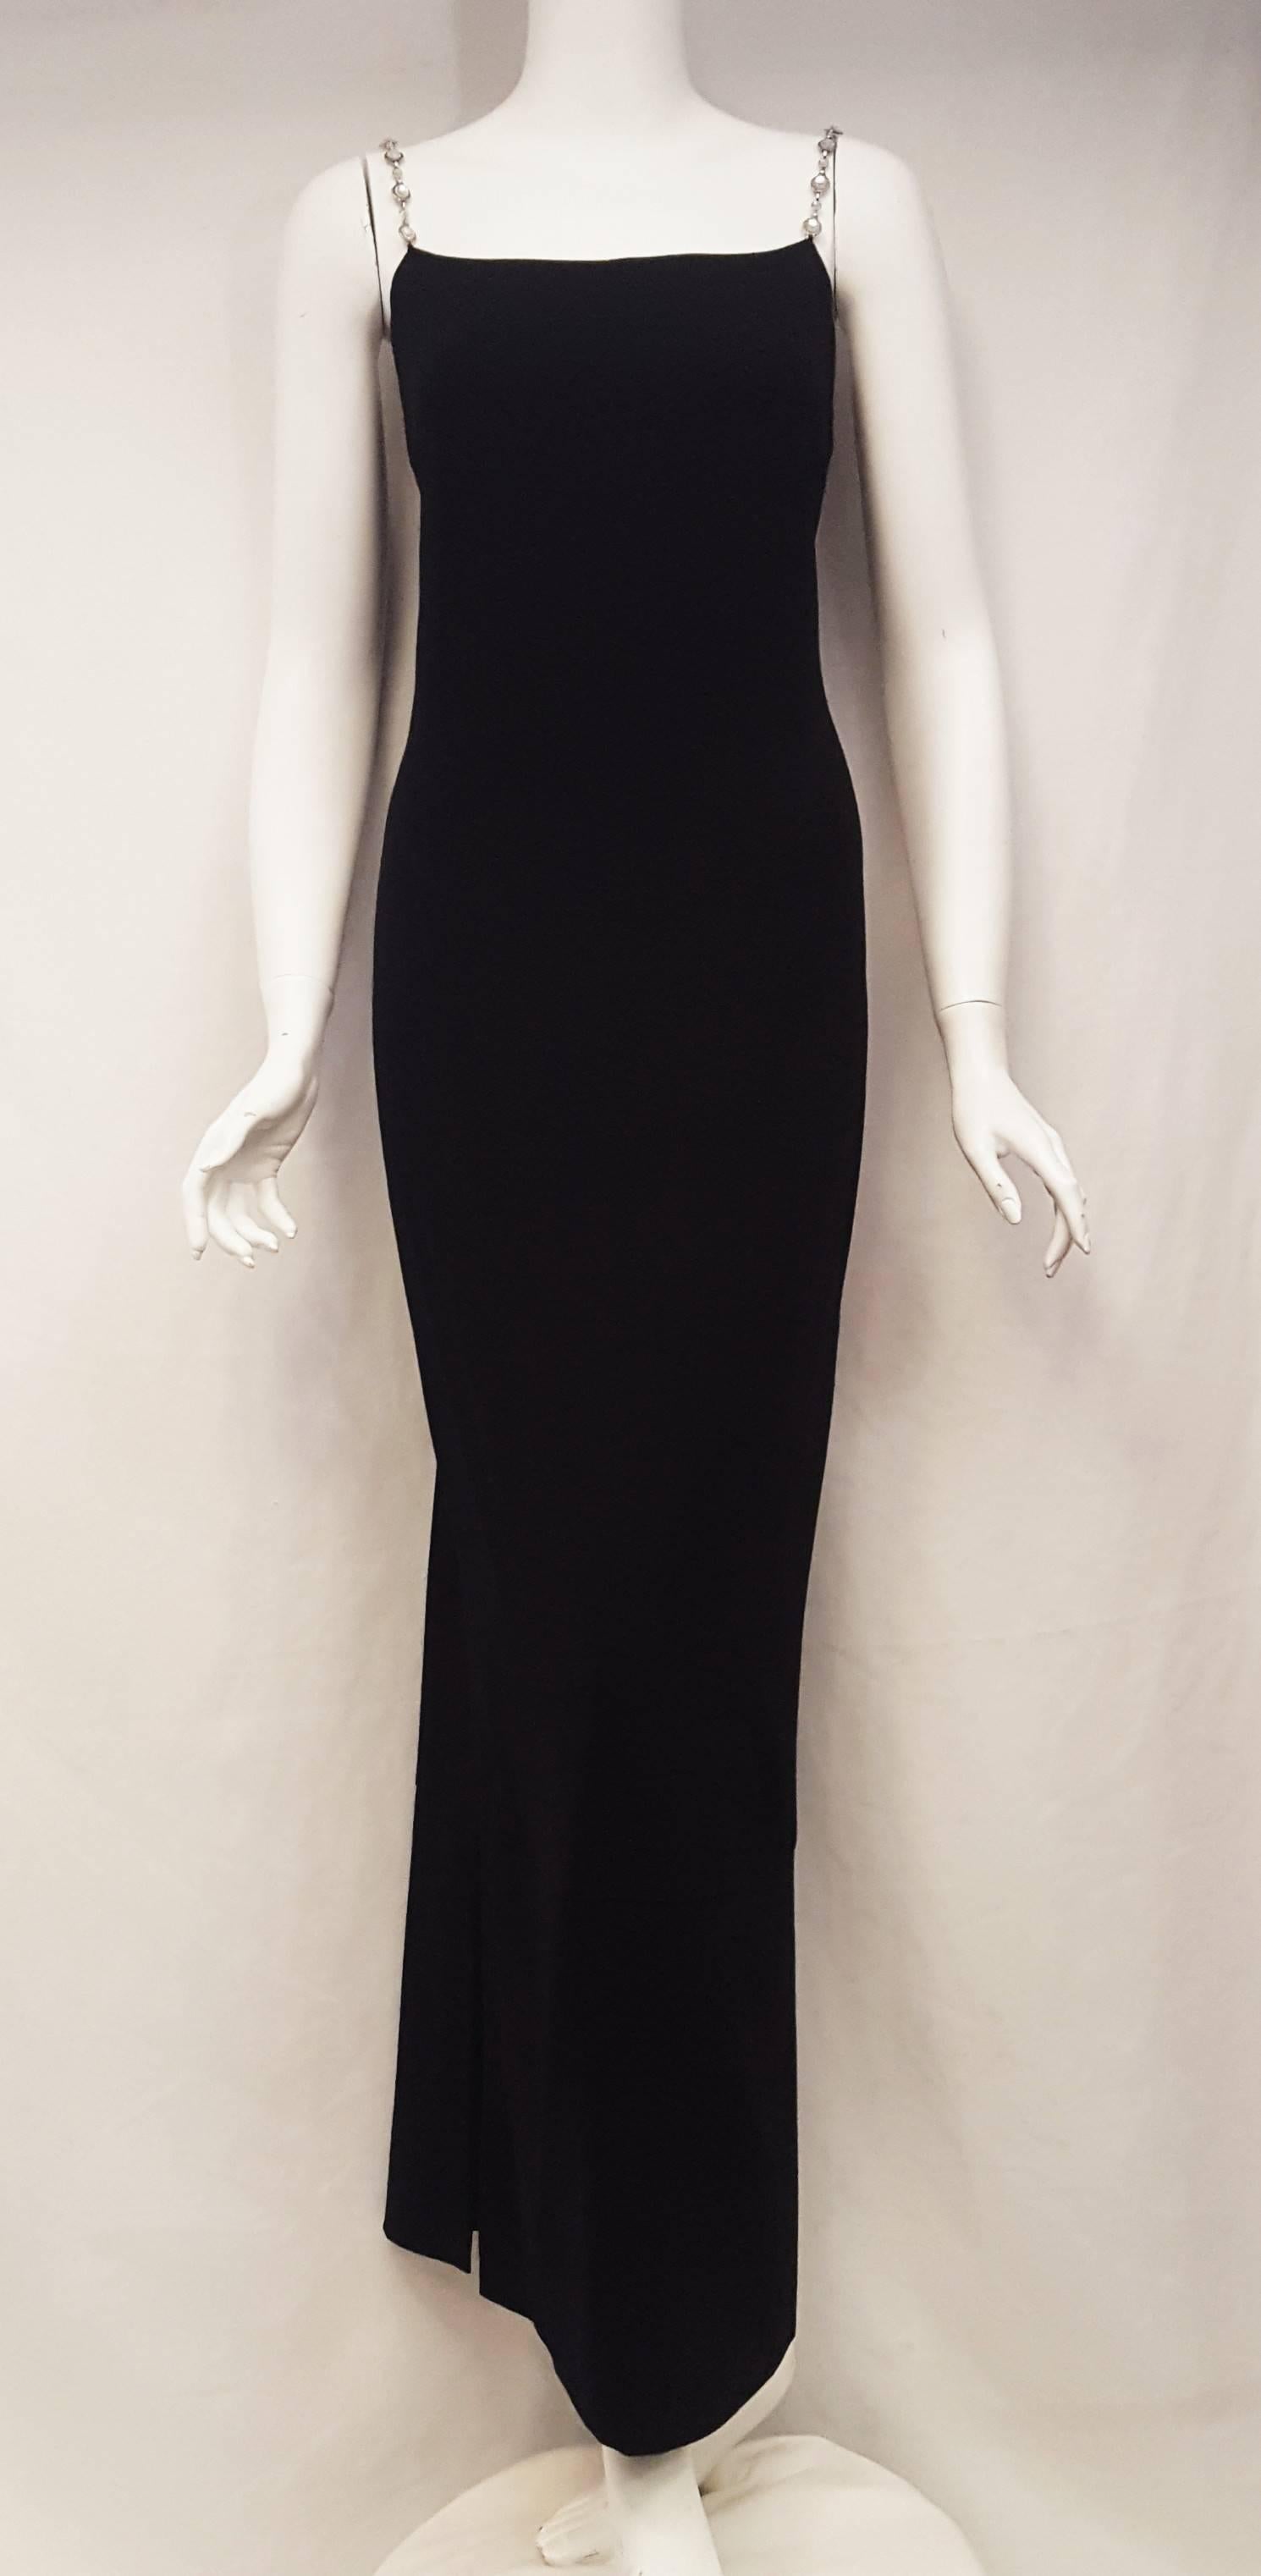 Chanel black wool long dress with crystal gripoix straps makes a statement for many occasions!  It will stand out much more than your typical LBD.  The gripoix crystal is set in an elegant yet sturdy silver tone chain.  The hidden zipper is set to